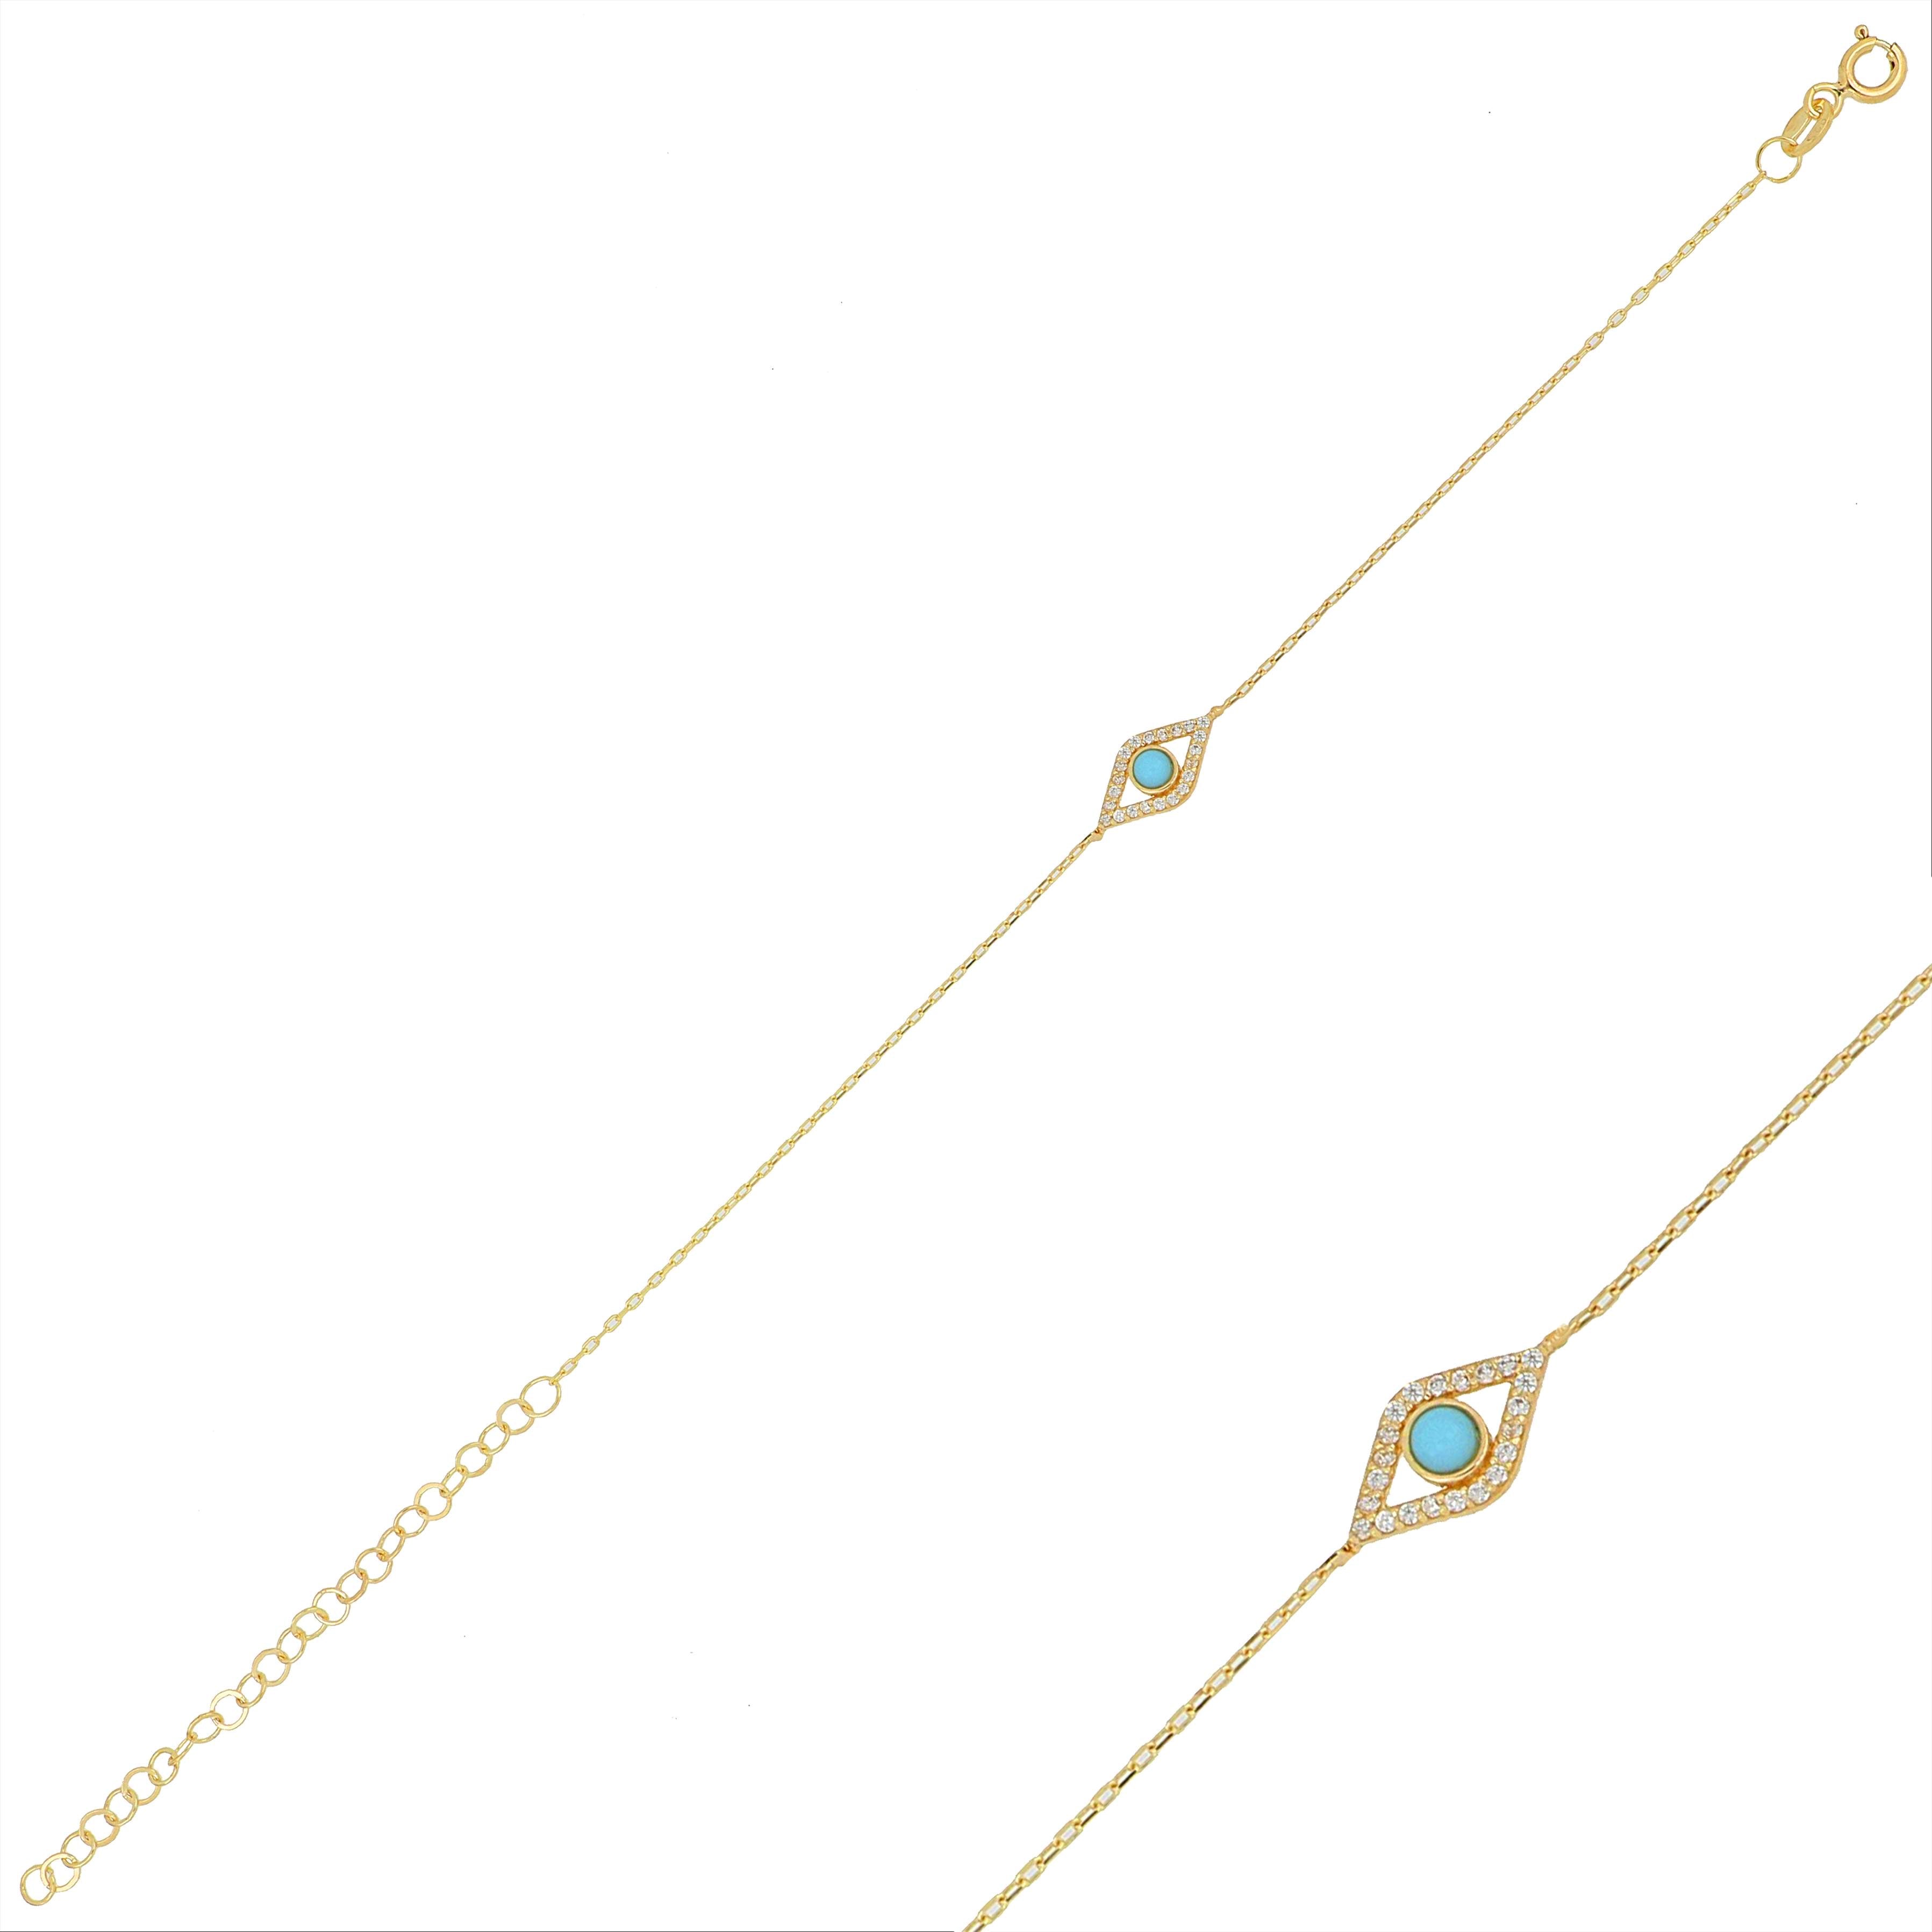 Silver gold plated dainty turquoise eye anklet